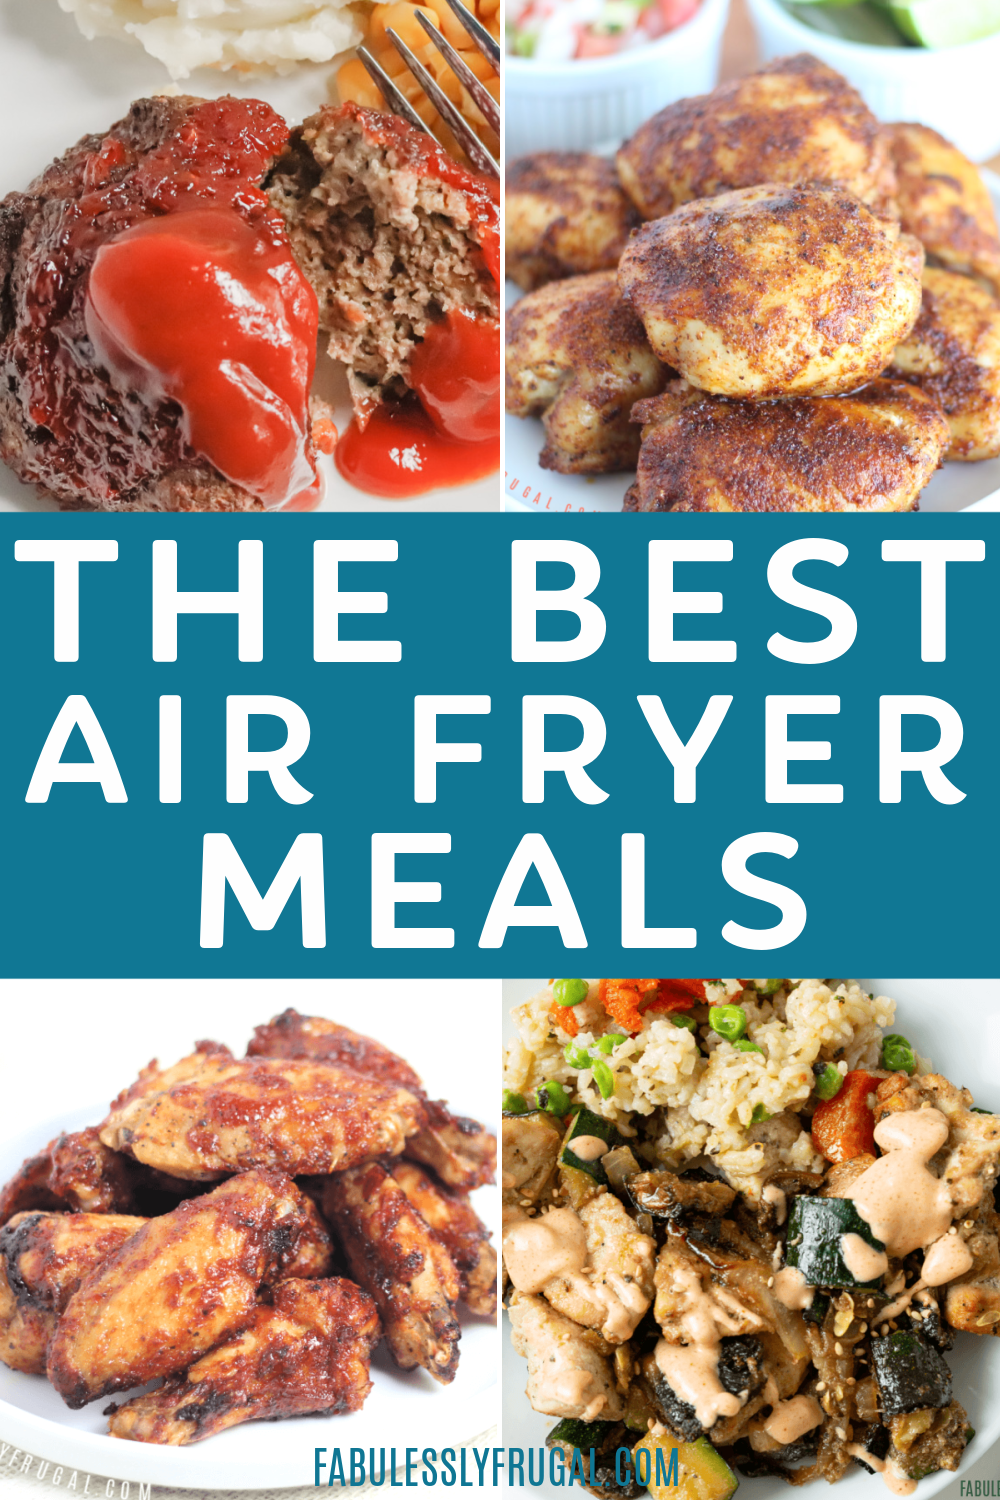 Kid-friendly Air Fryer Recipes for Picky Eaters - High Chair Chronicles